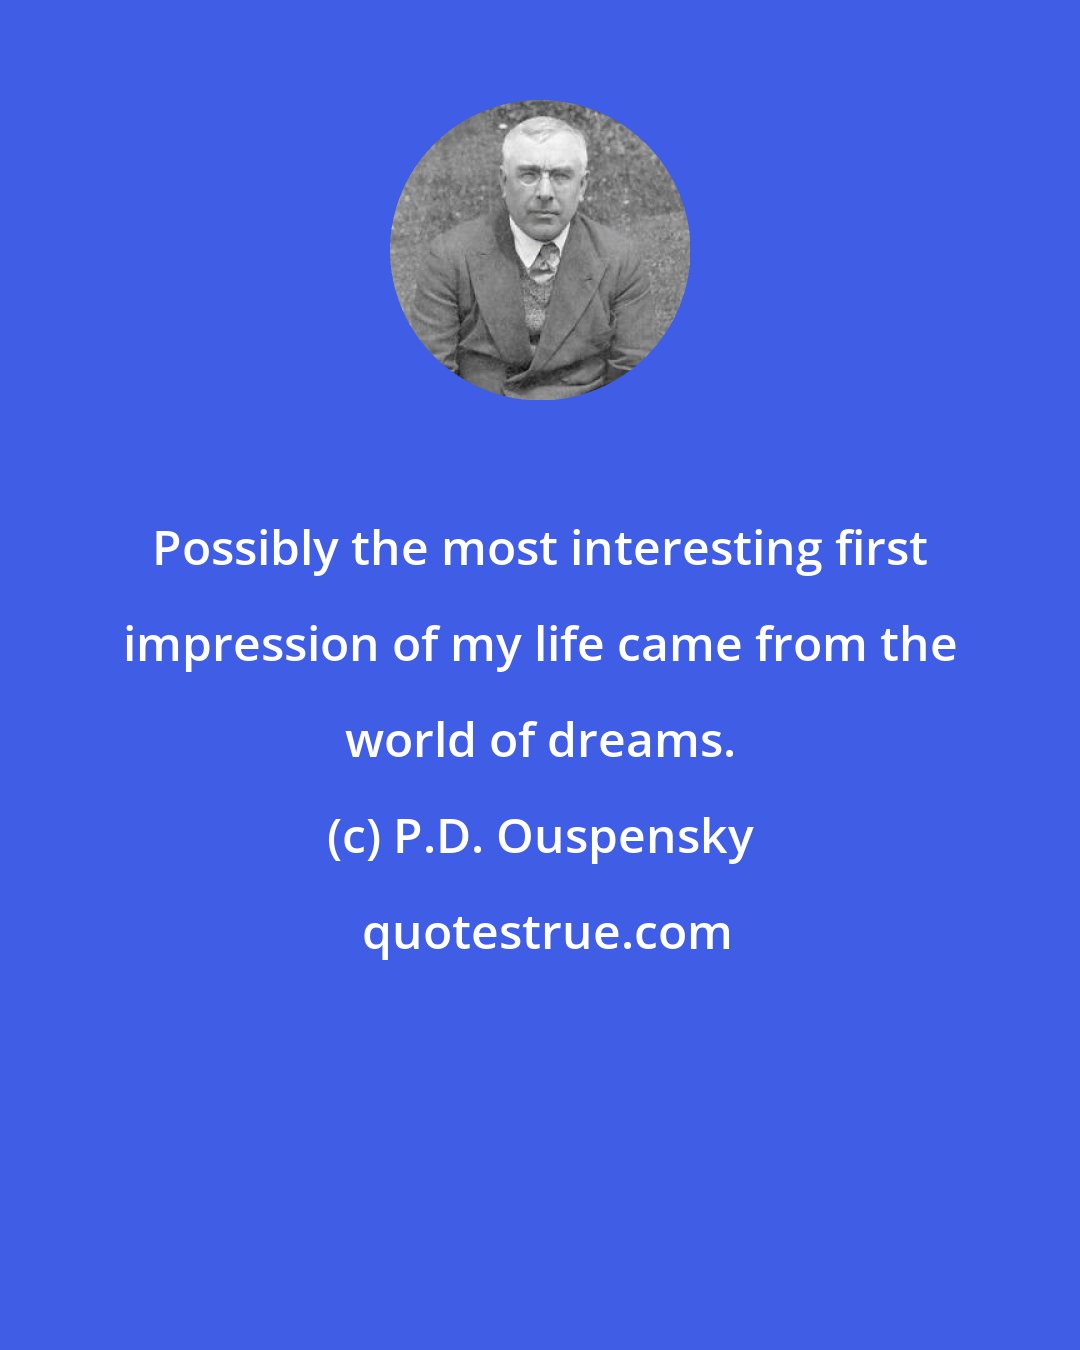 P.D. Ouspensky: Possibly the most interesting first impression of my life came from the world of dreams.